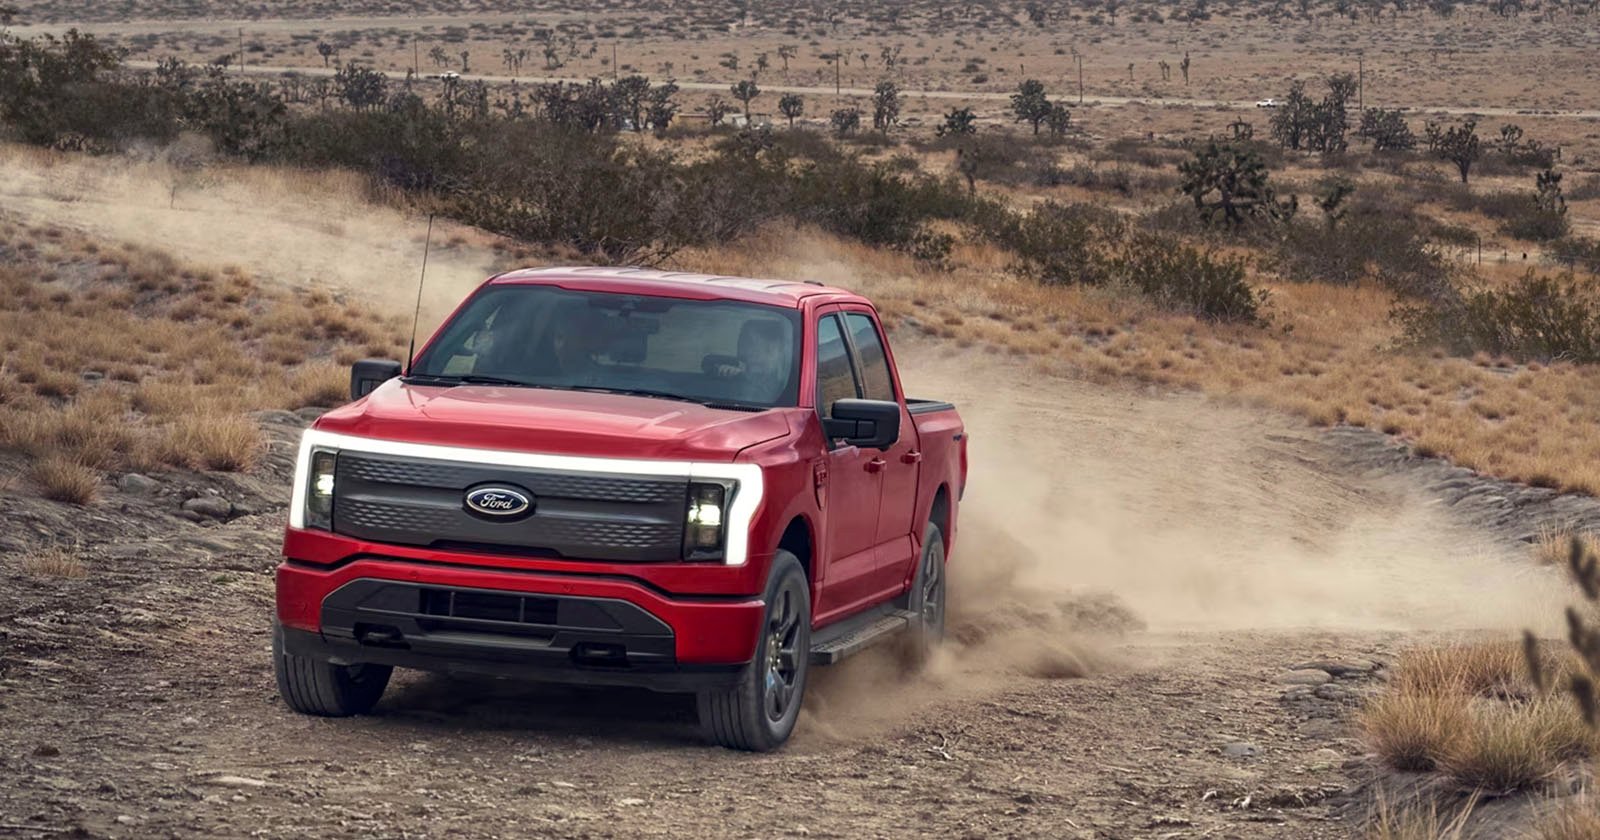 Ford patent for a photography assistant, Ford F-150 Lightning in red shown tearing up some dirt.